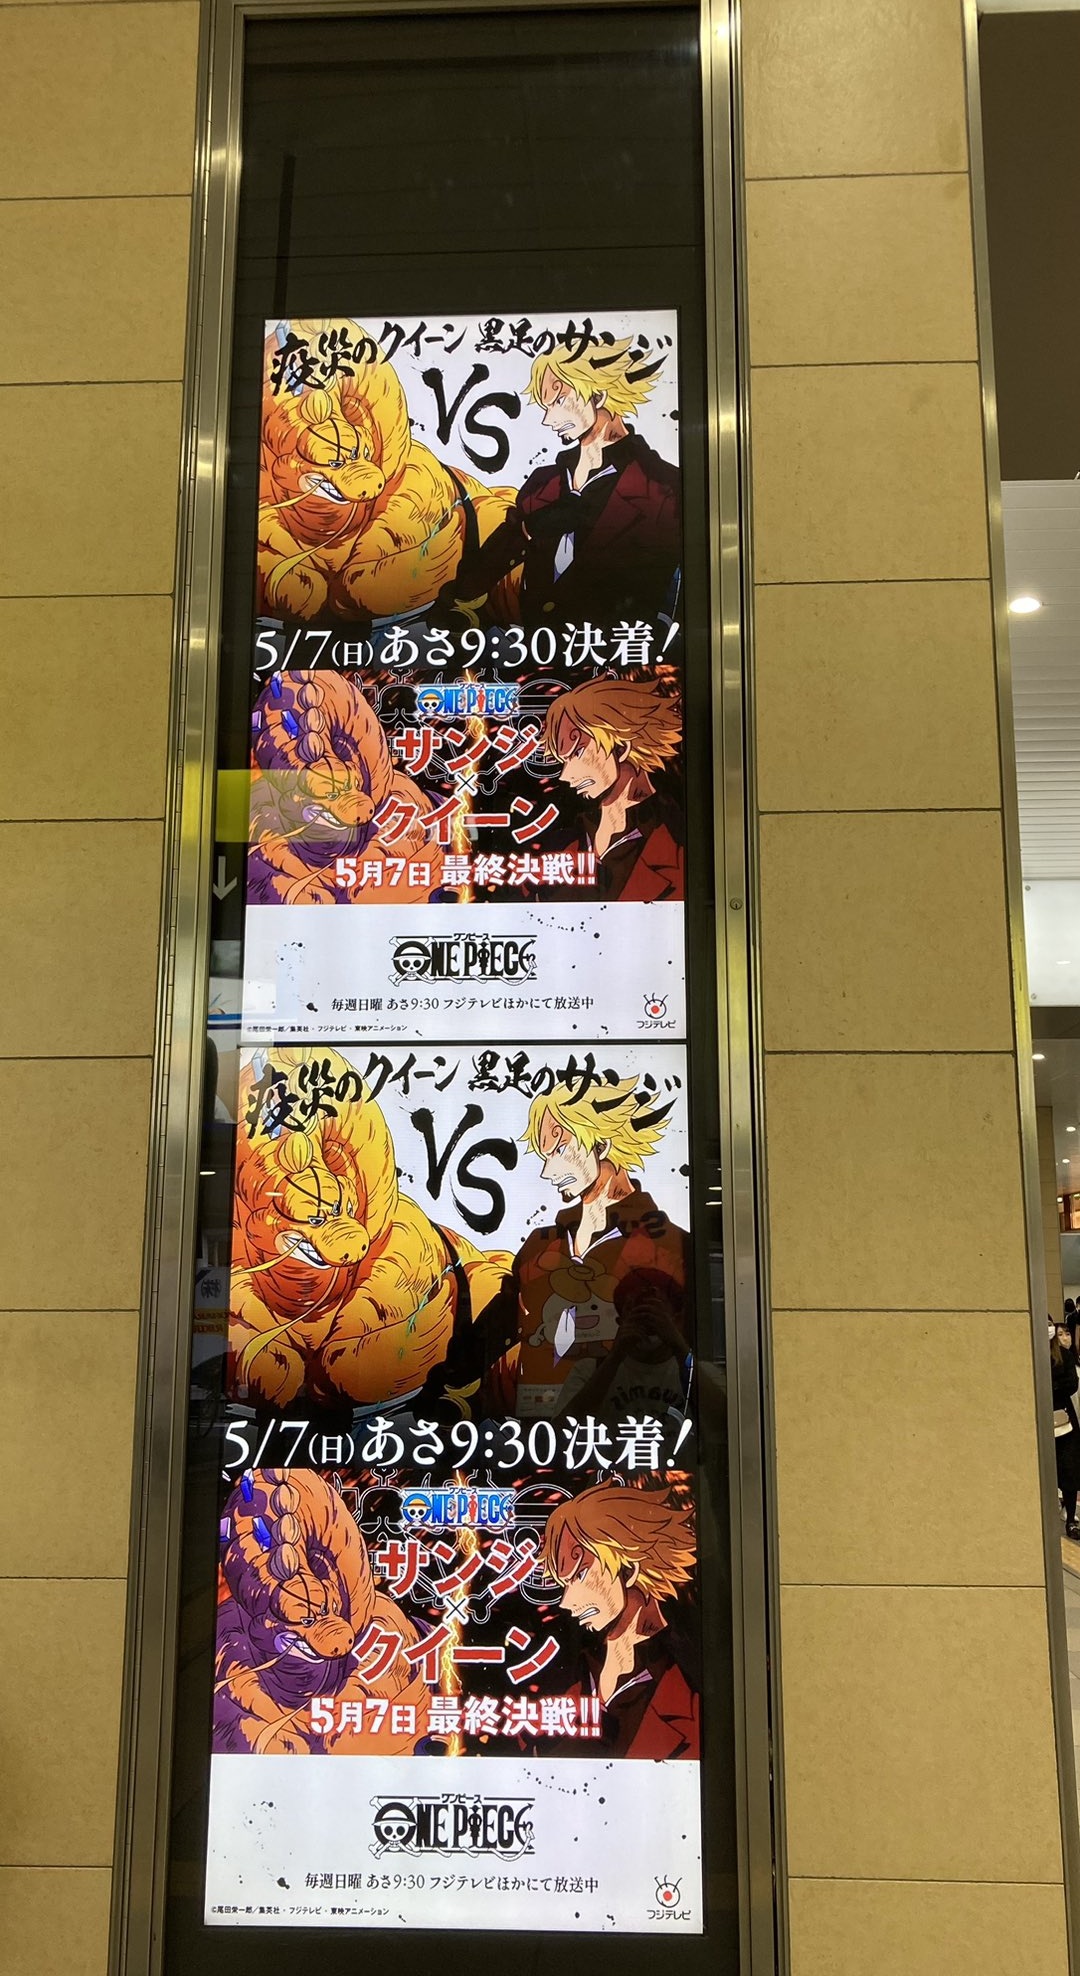 Episode 1061 will adapt all of Chapter 1034, and Sanji vs. Queen ads will  be playing throughout Tokyo to promote the upcoming episode. The…